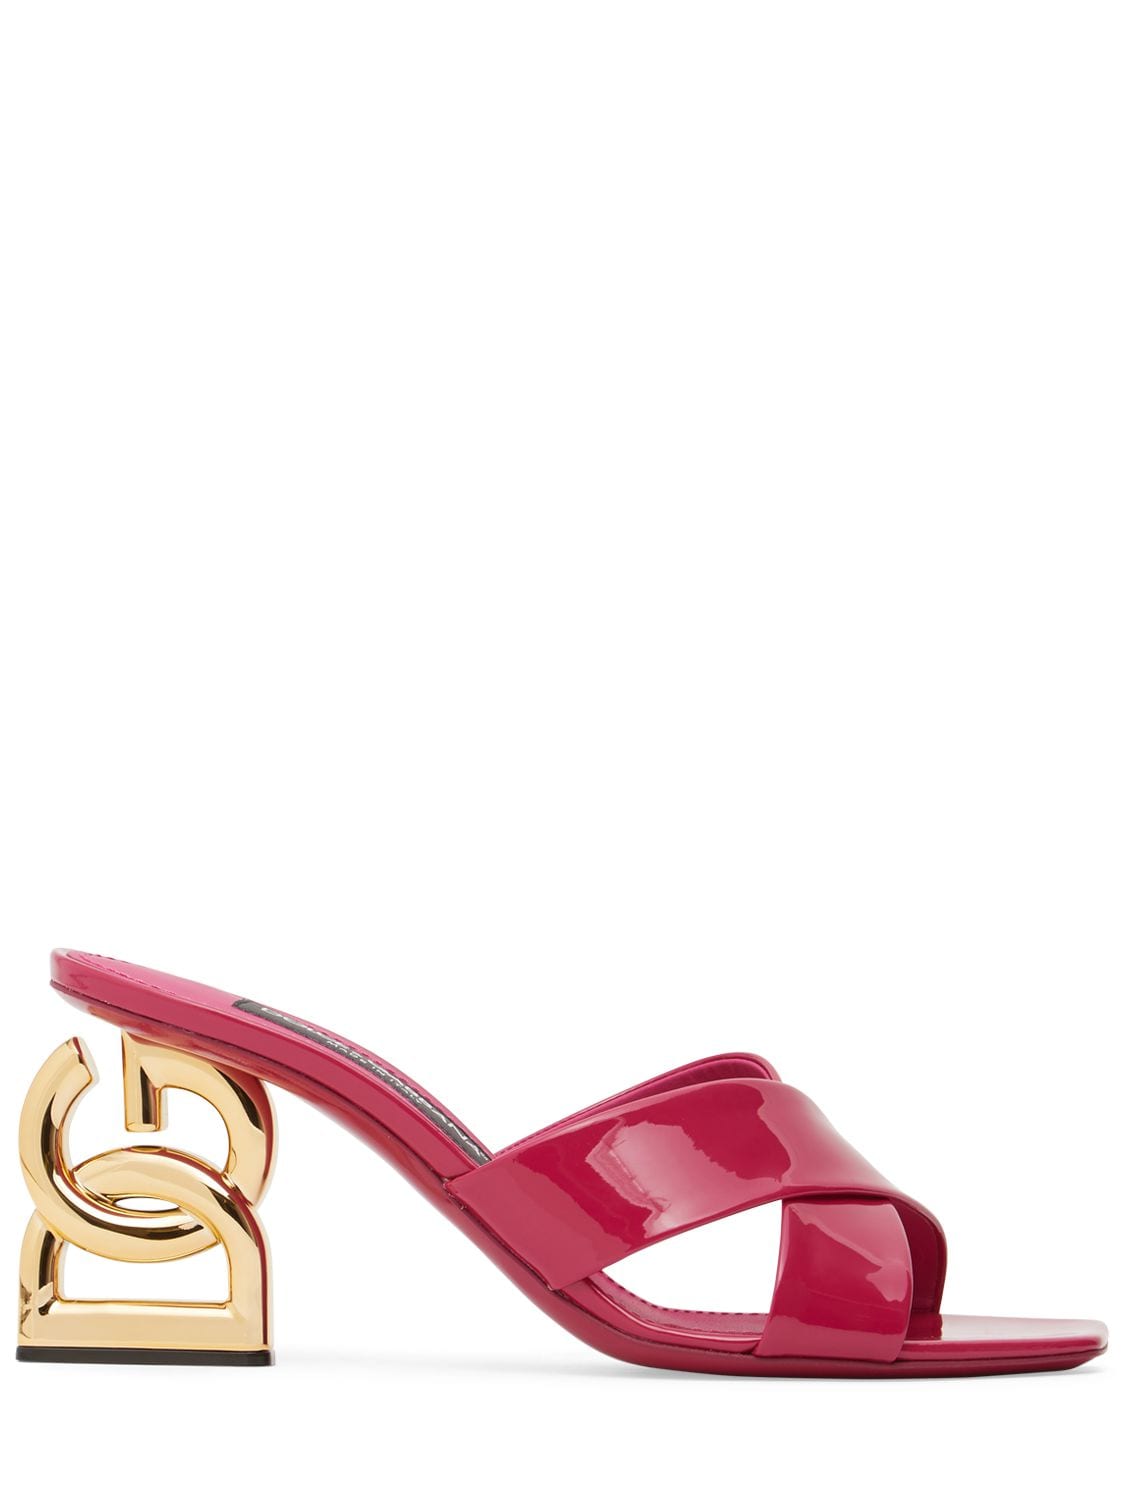 Image of 75mm Patent Leather Mules Sandals